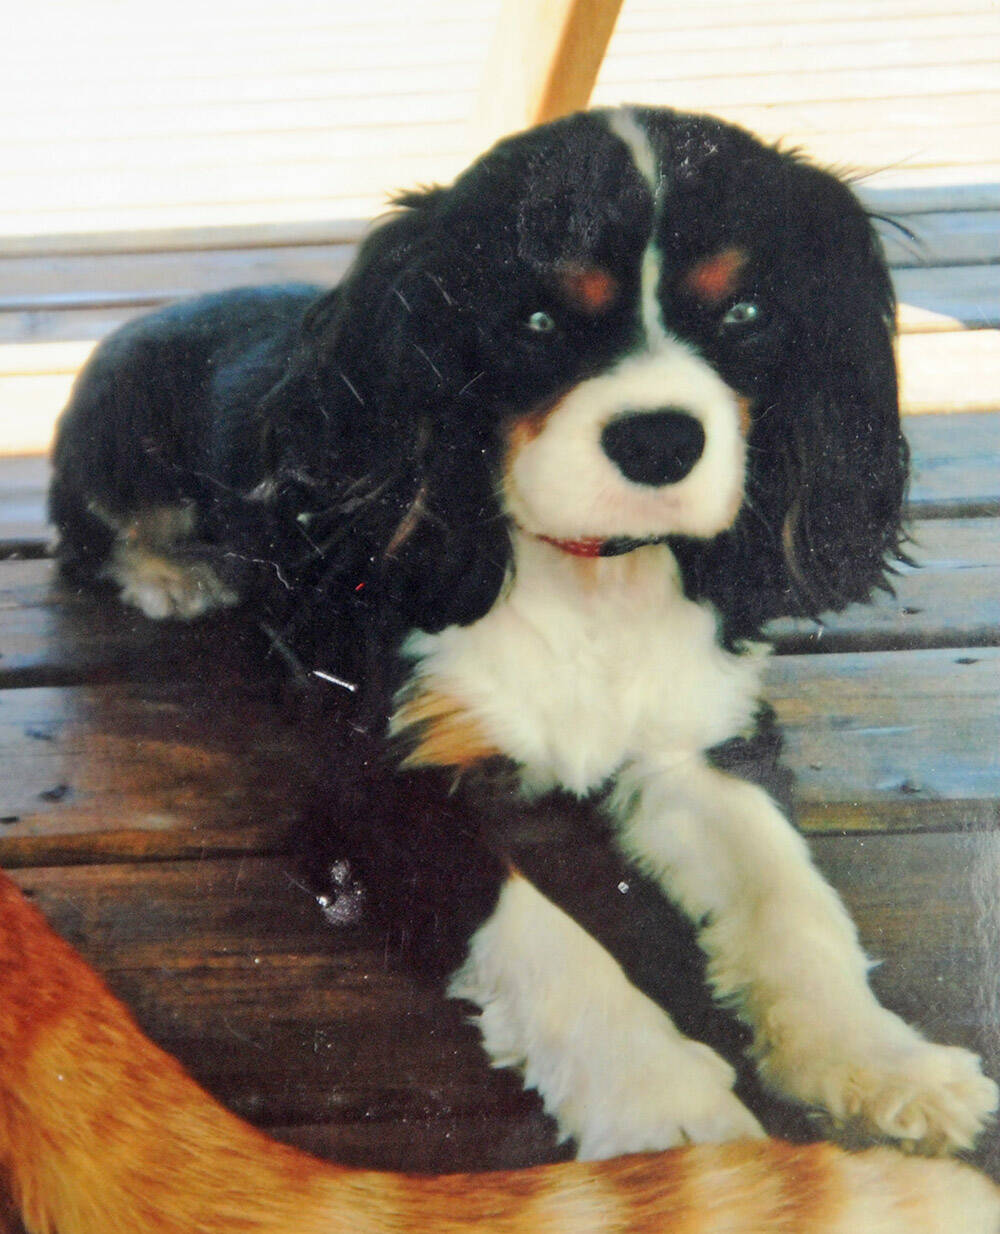 Texas, a 14-pound, nine-year-old King Charles spaniel, was killed by two pit bulls in Chilliwack on Nov. 16, 2021. (Submitted)